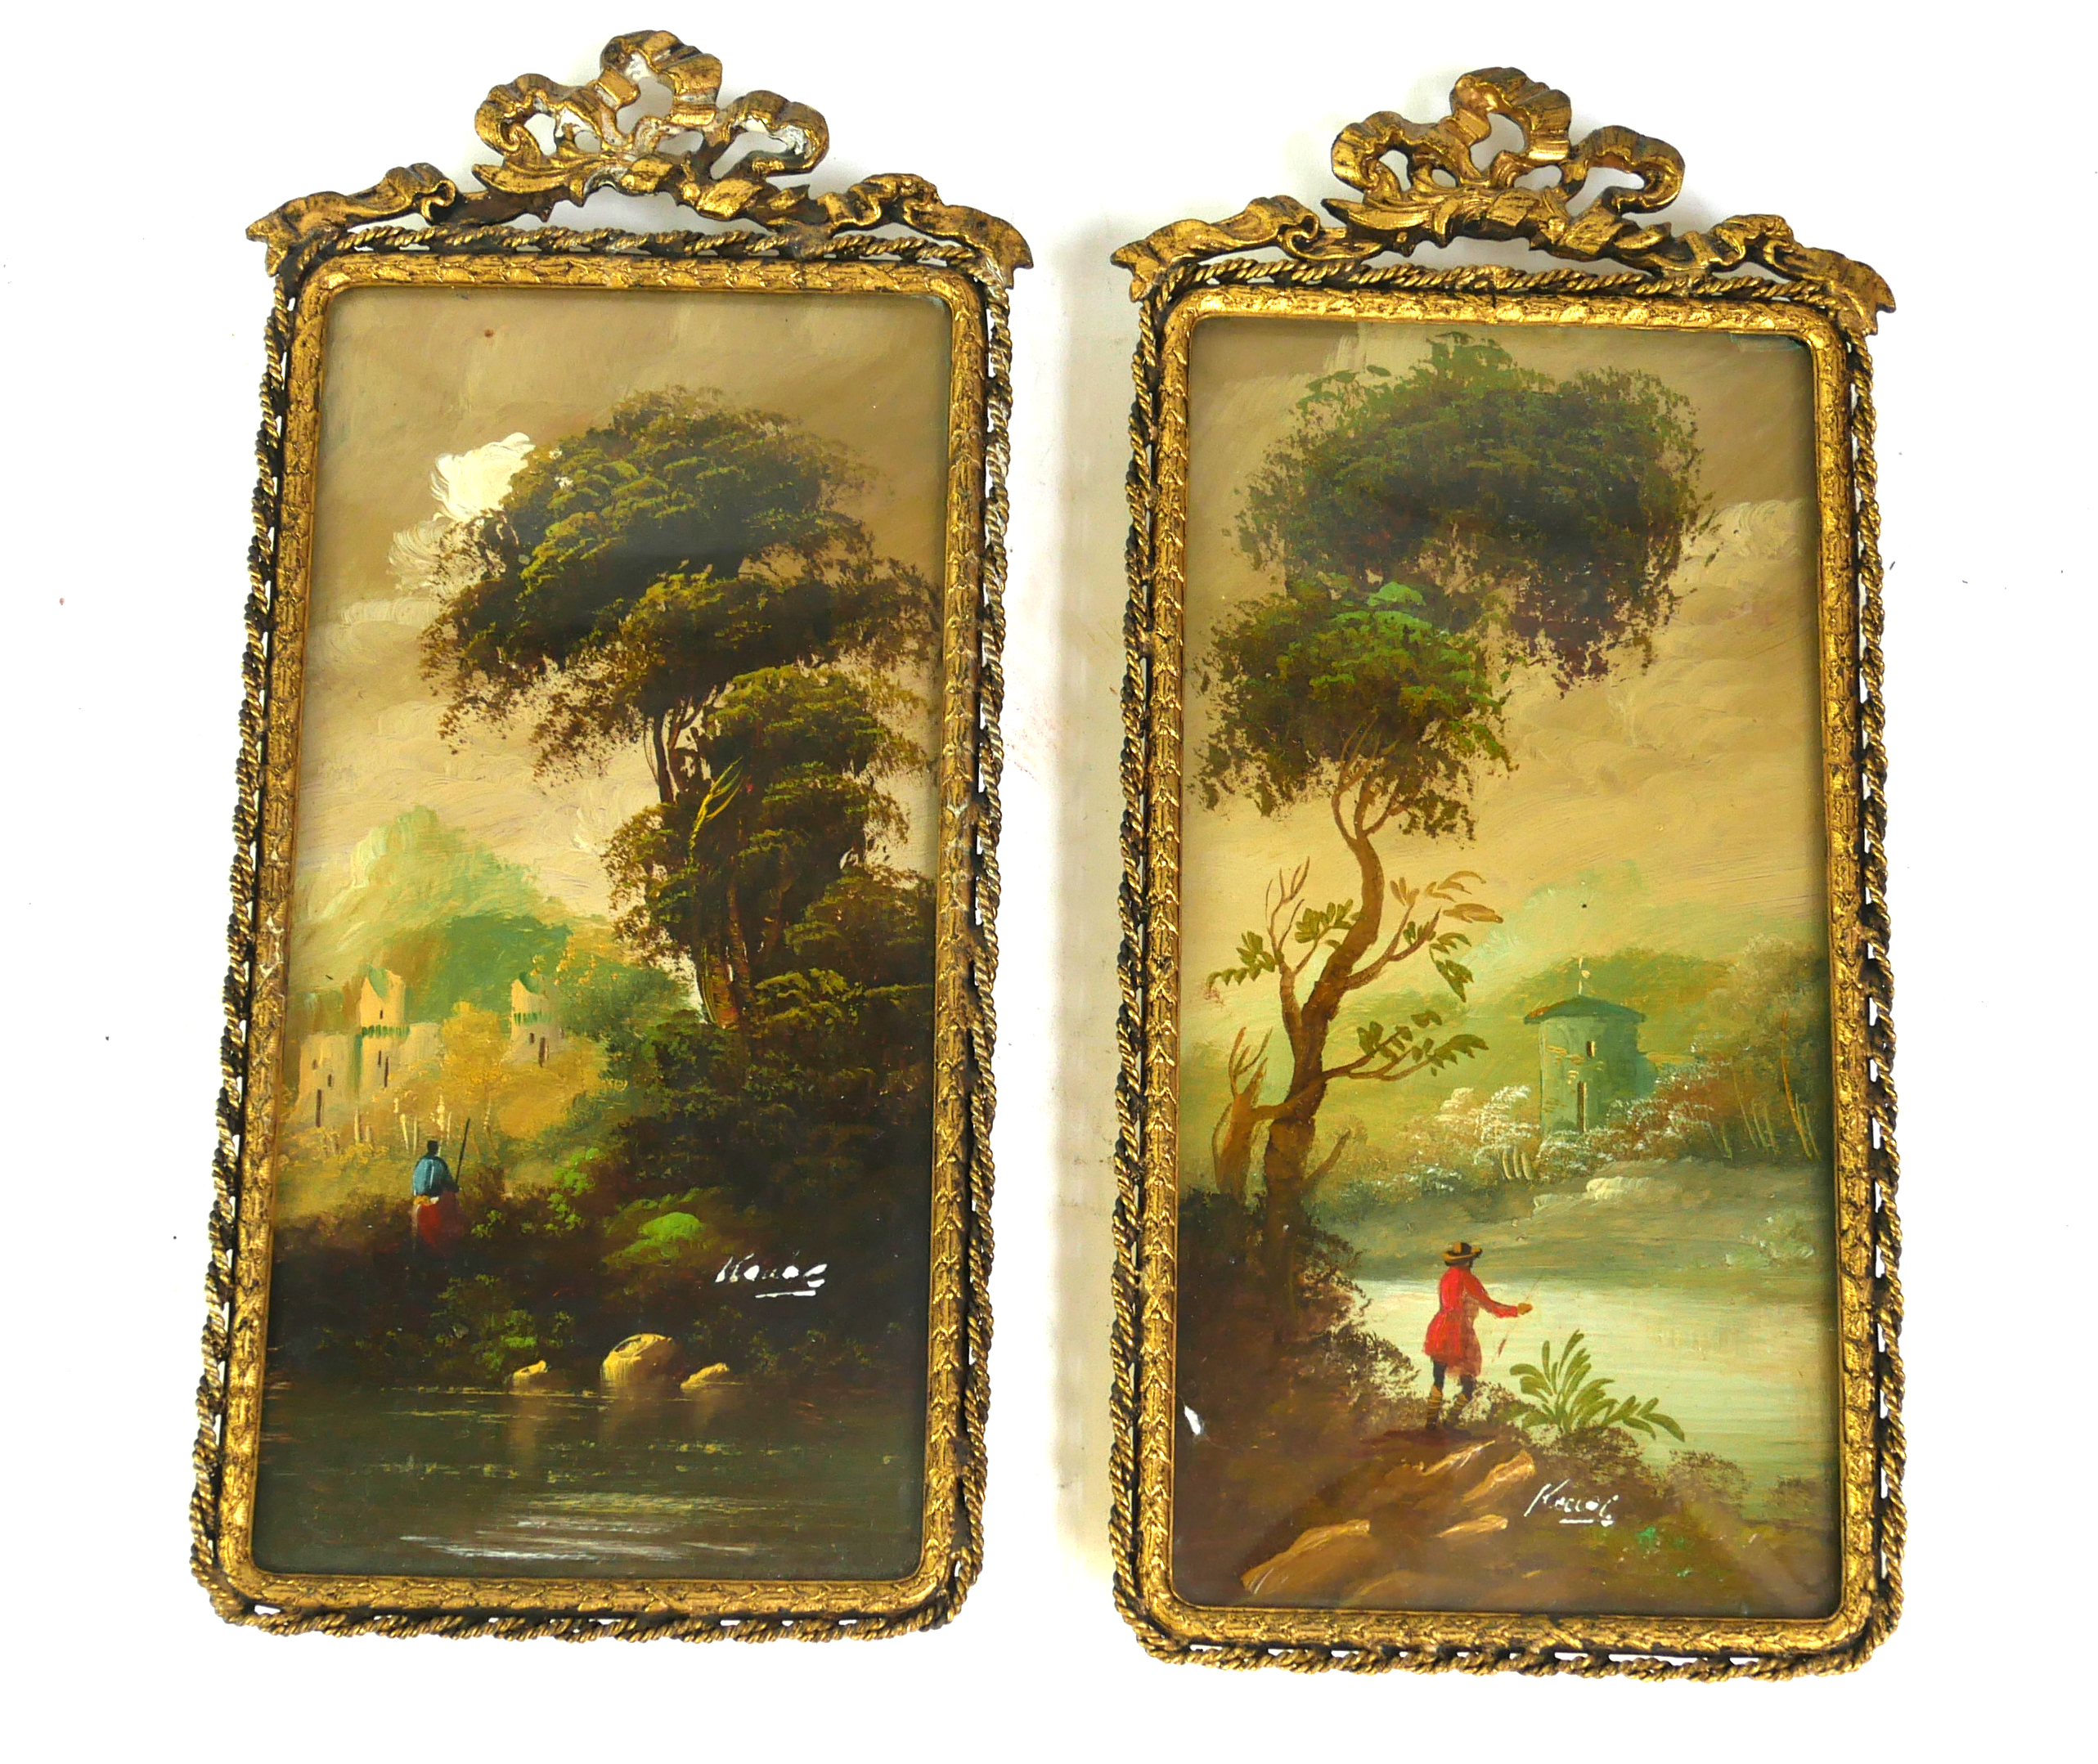 A PAIR OF 20TH CENTURY CONTINENTAL RECTANGULAR OILS ON CARD, LANDSCAPES With a solitary figure